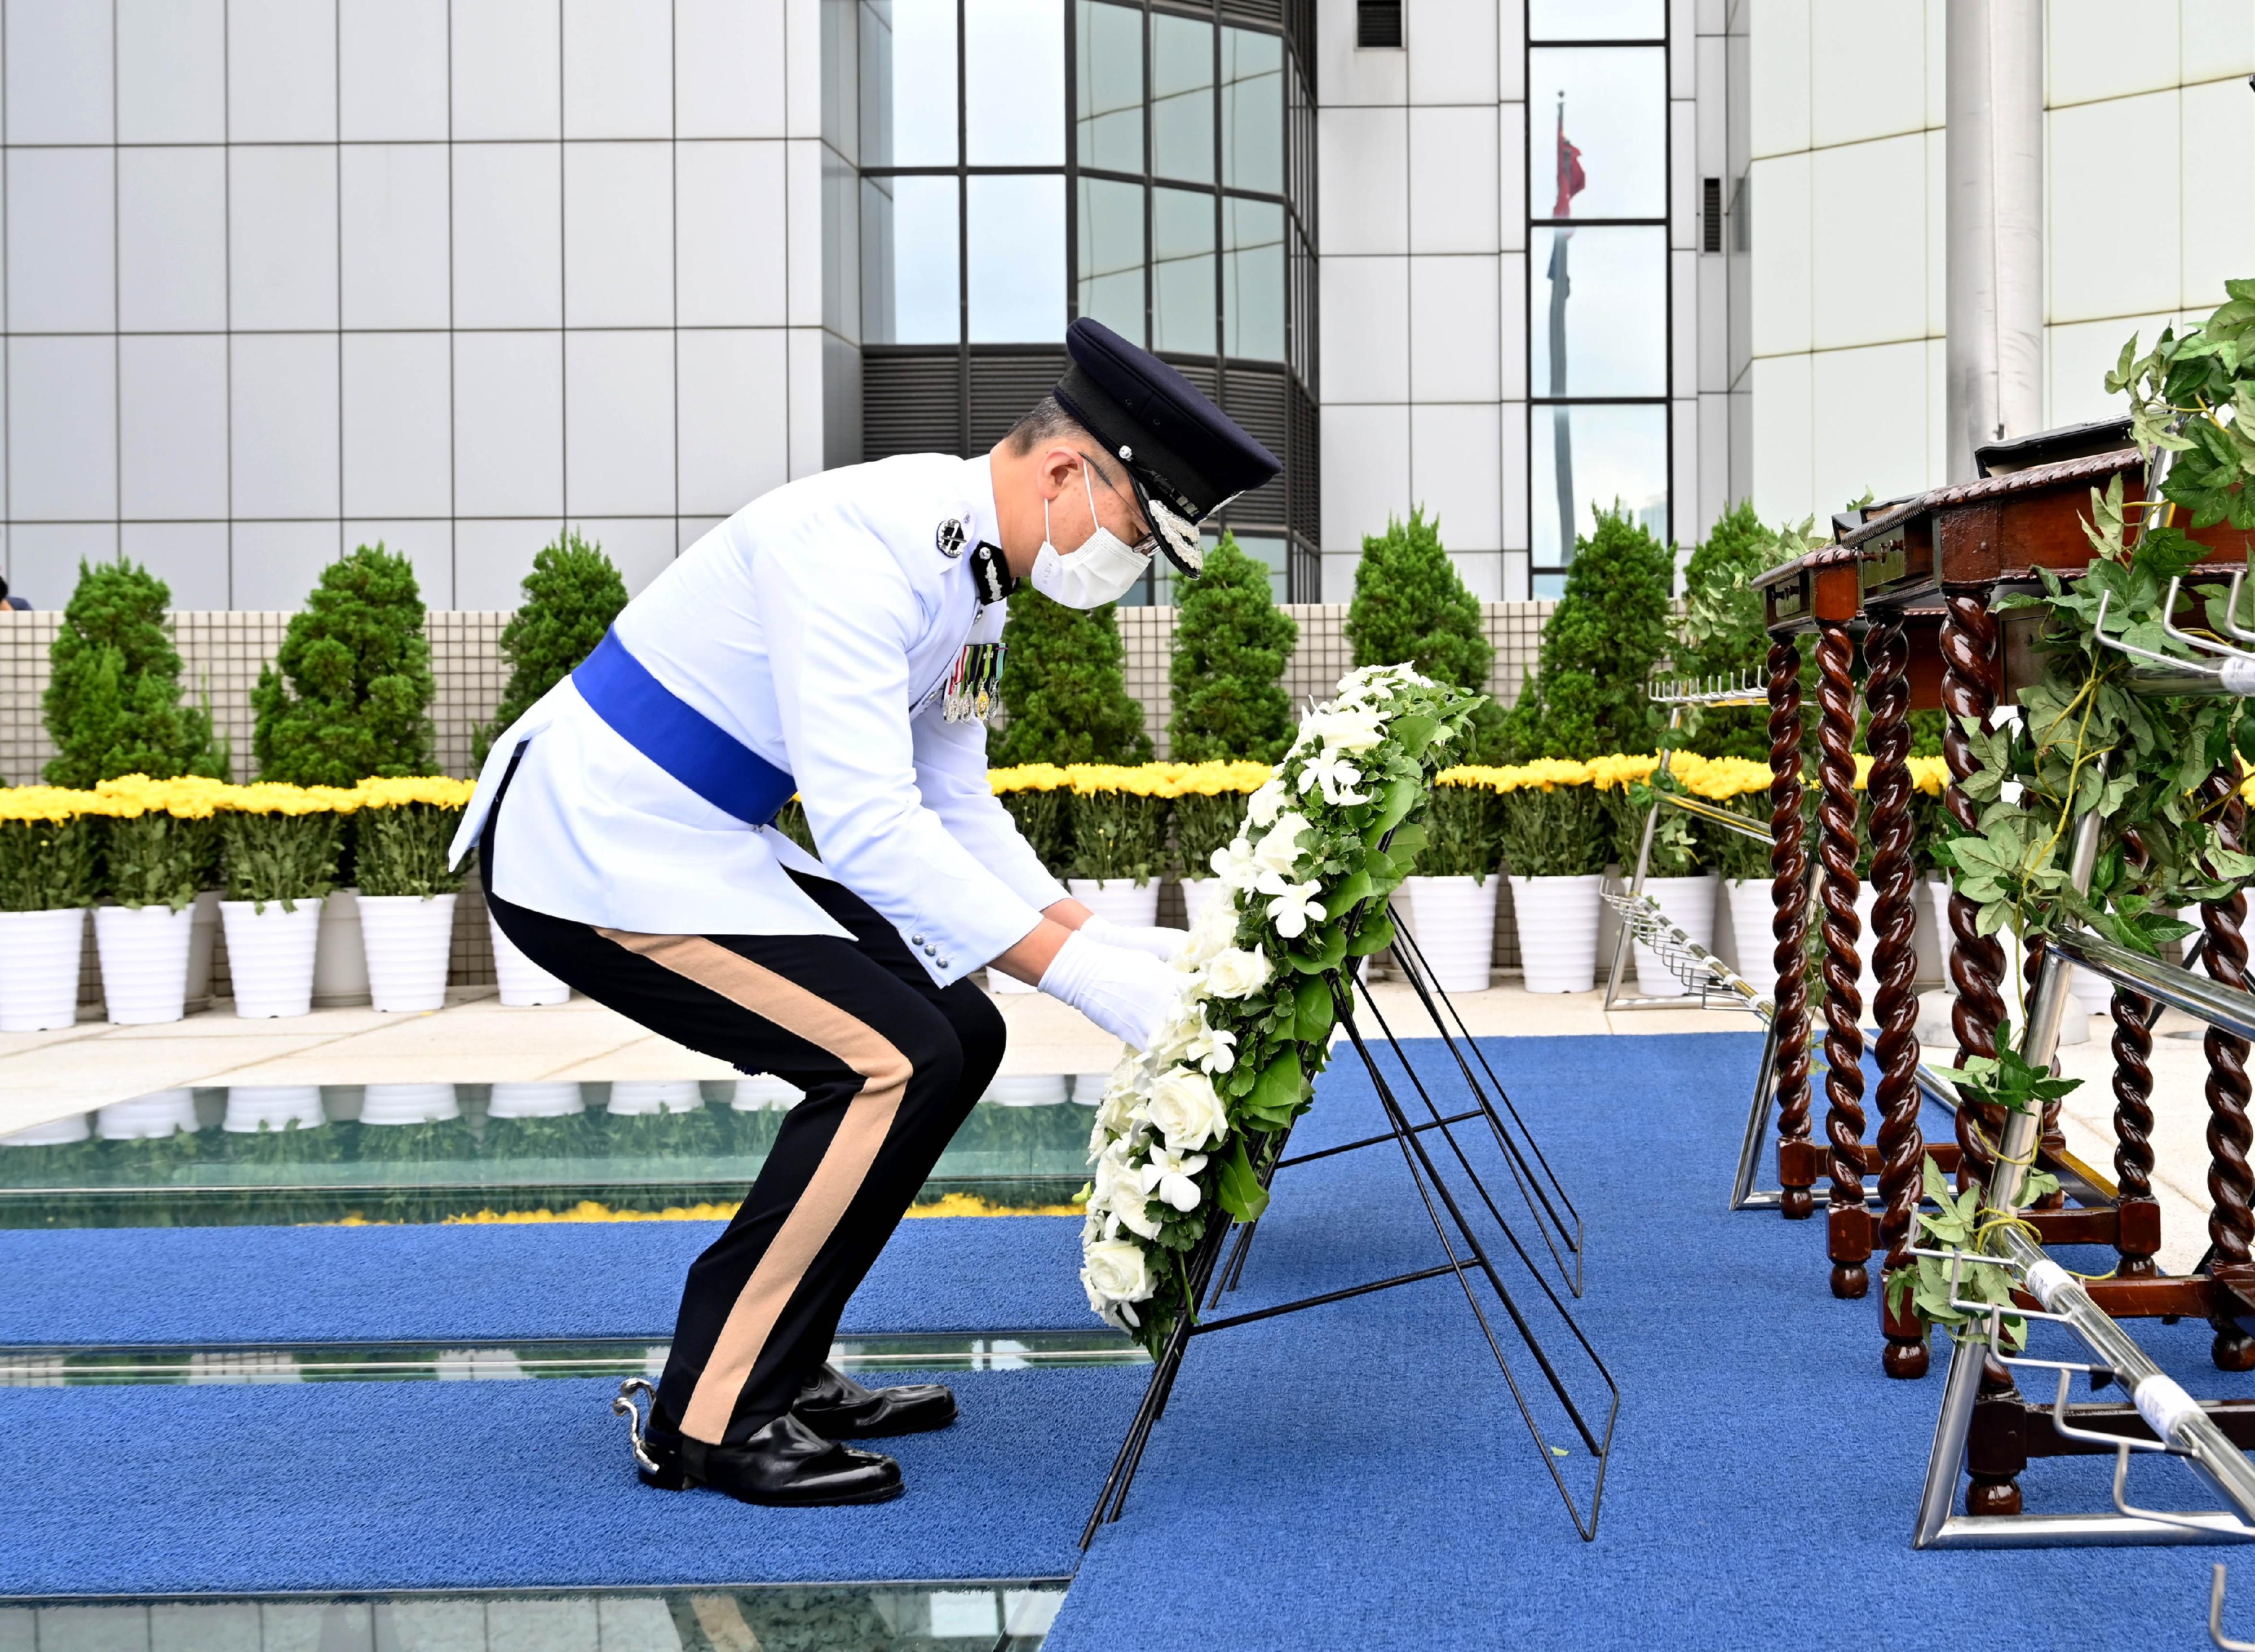 The Hong Kong Police Force holds a ceremony at the Police Headquarters this morning (November 11) to pay tribute to members of the Hong Kong Police Force and Hong Kong Auxiliary Police Force who have given their lives in the line of duty. Photo shows the Commissioner of Police, Mr Siu Chak-yee, laying a wreath in front of the Books of Remembrance in which the names of the fallen are inscribed.